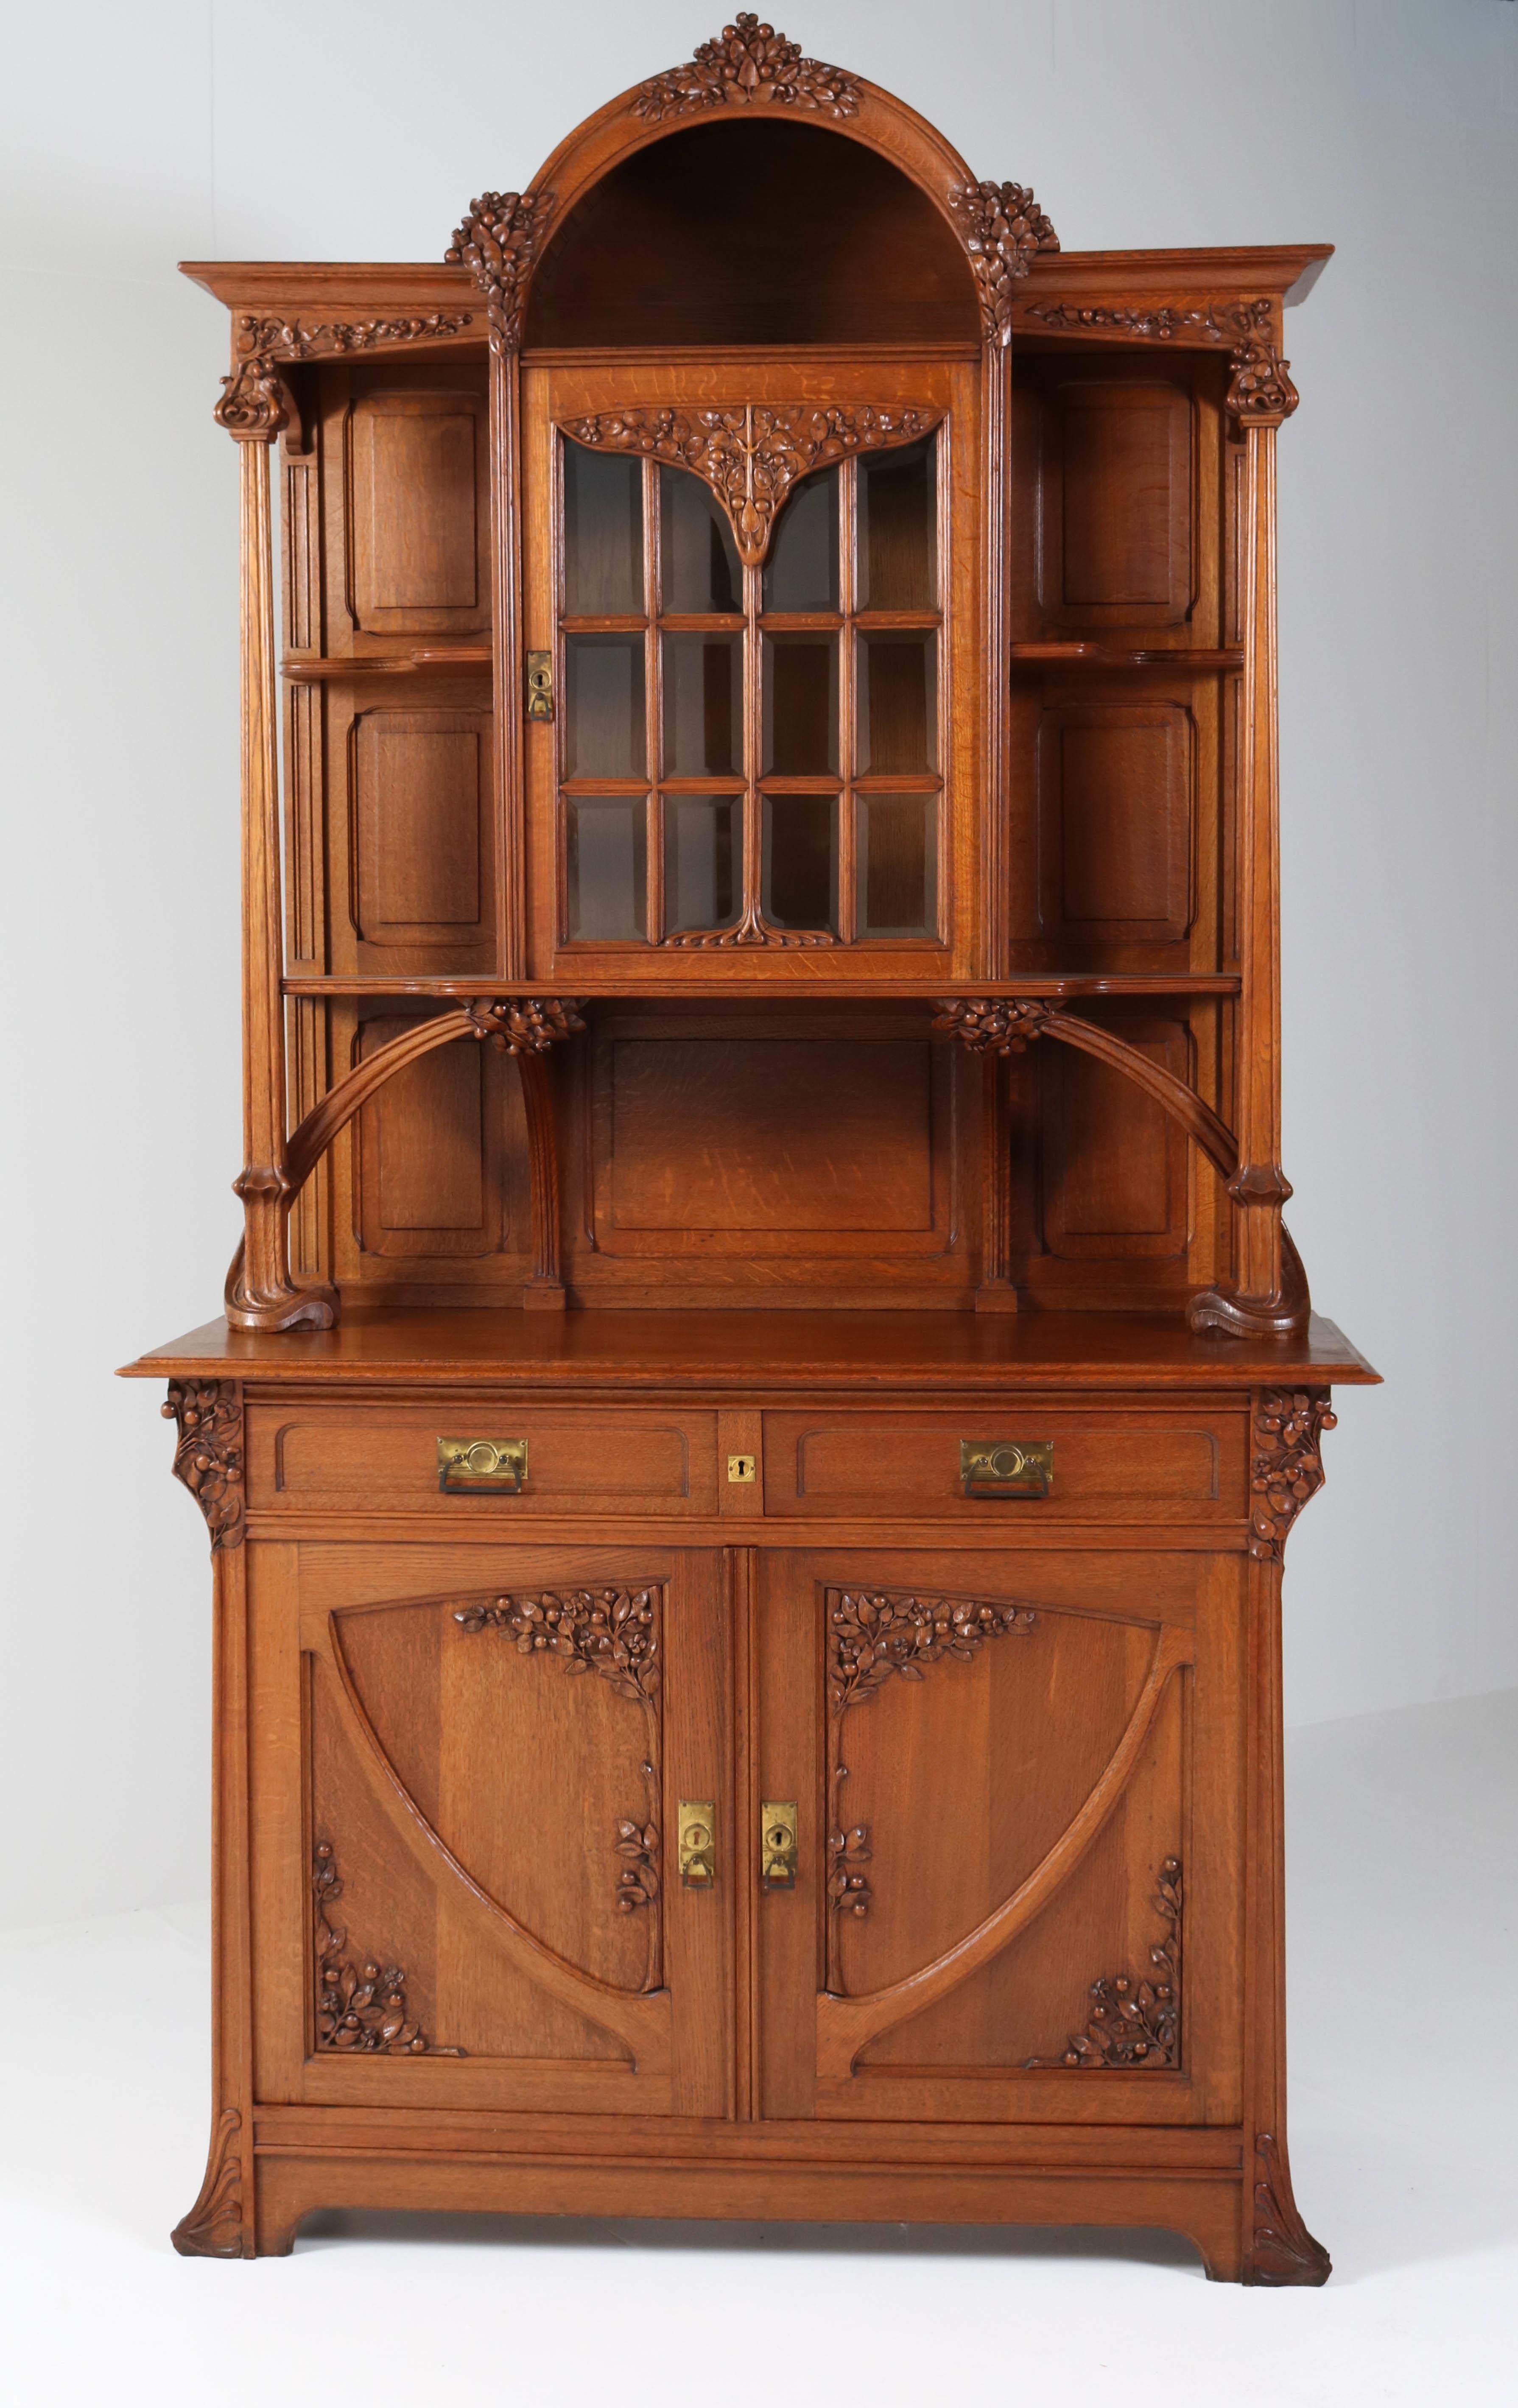 Wonderful top quality Art Nouveau buffet or cupboard.
Attributed to Jacques Gruber.
Striking French design from the 1900s.
Solid oak with amazing carved details.
Original beveled glass panels, one has a tiny crack, hard to see.
In good original